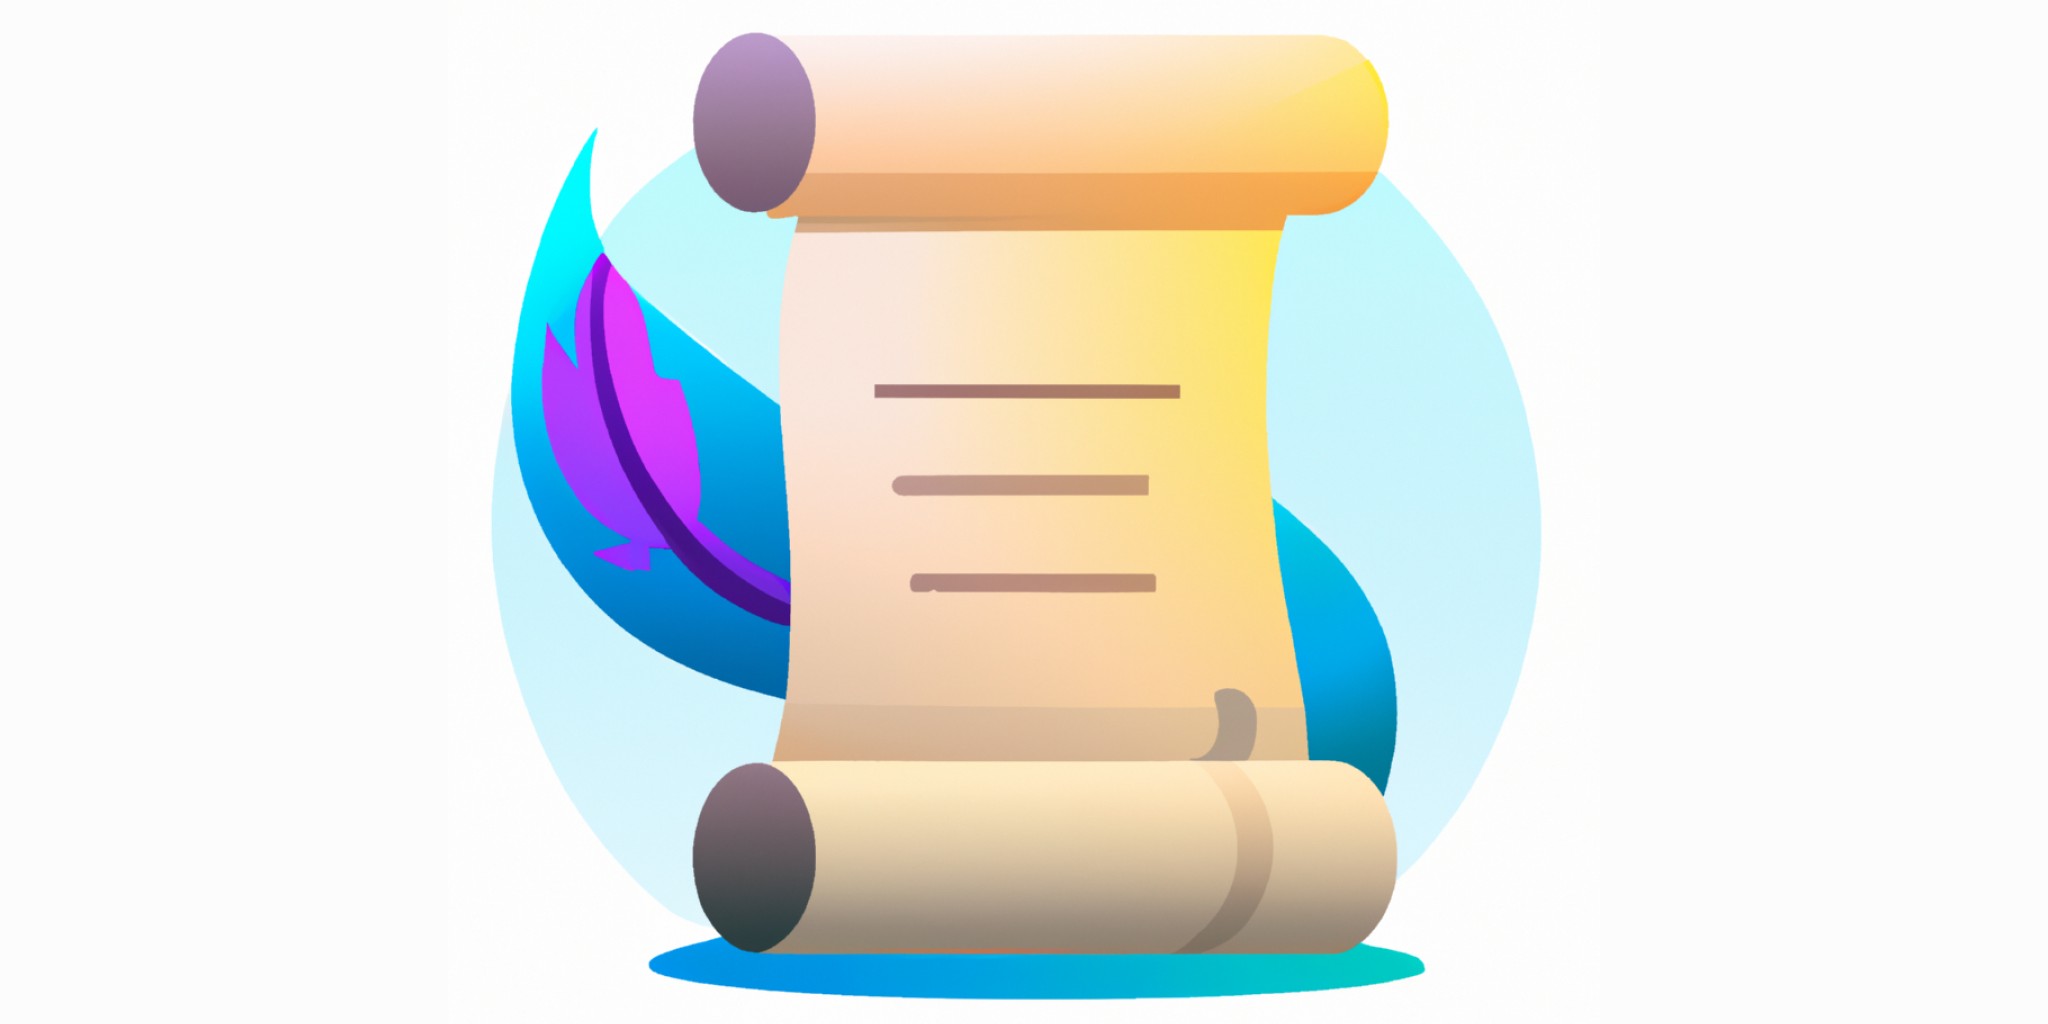 scroll of paper with a quill in flat illustration style with gradients and white background